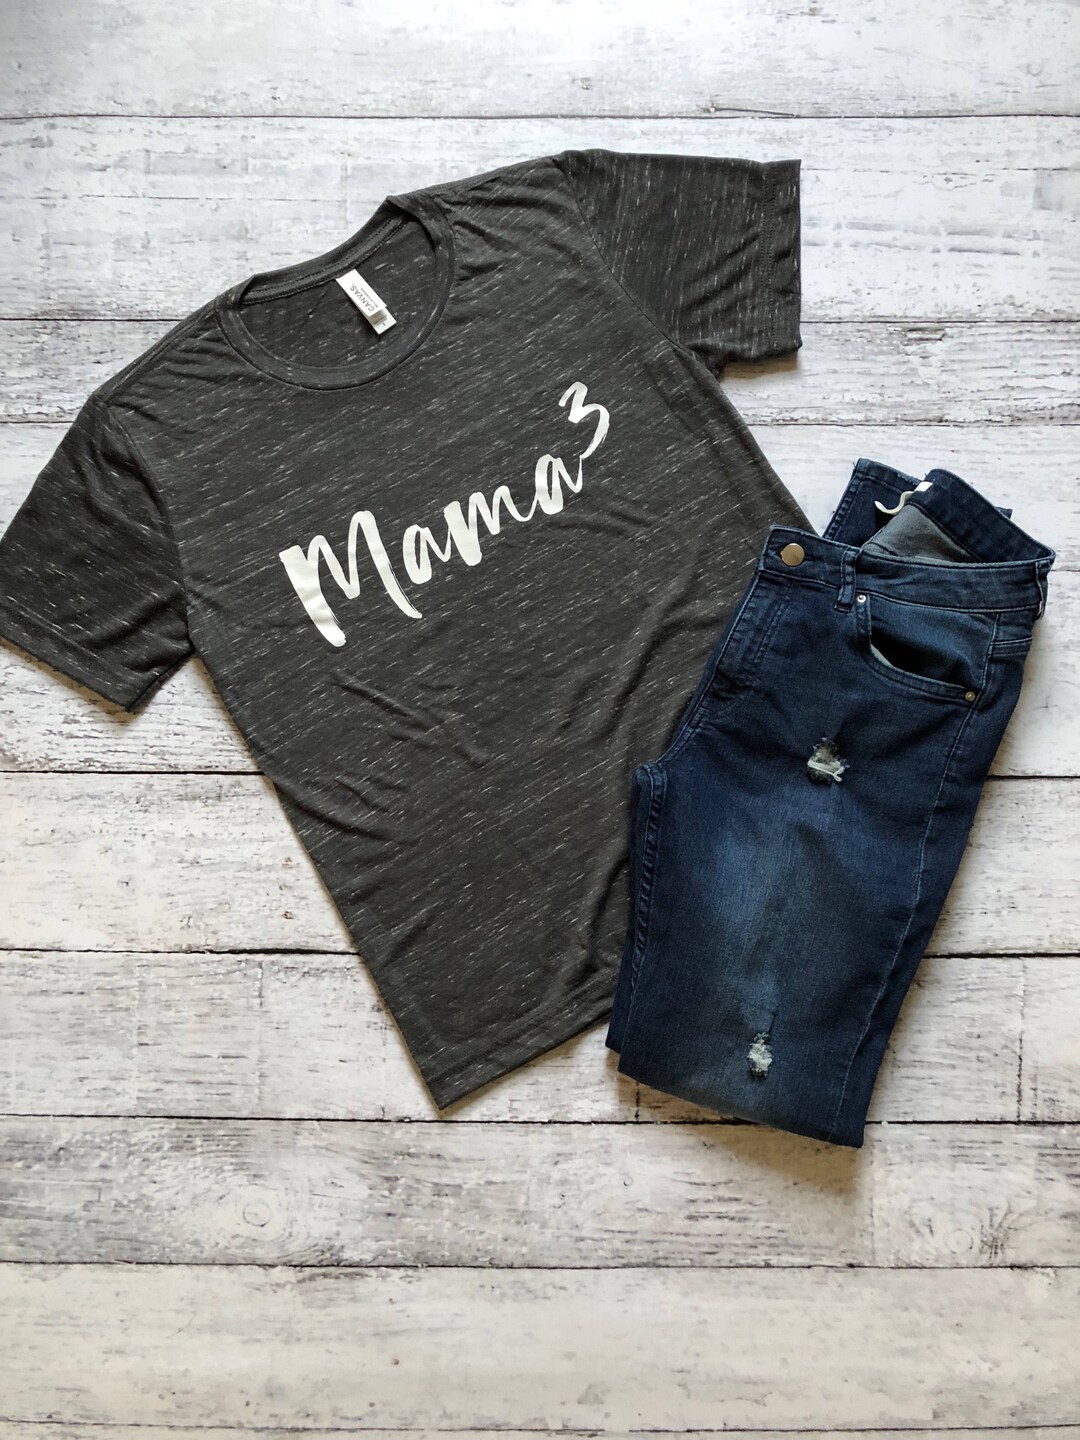 Mama Cubed Shirt / Mama Shirt / Gifts for Mom / Gifts for Her - Etsy